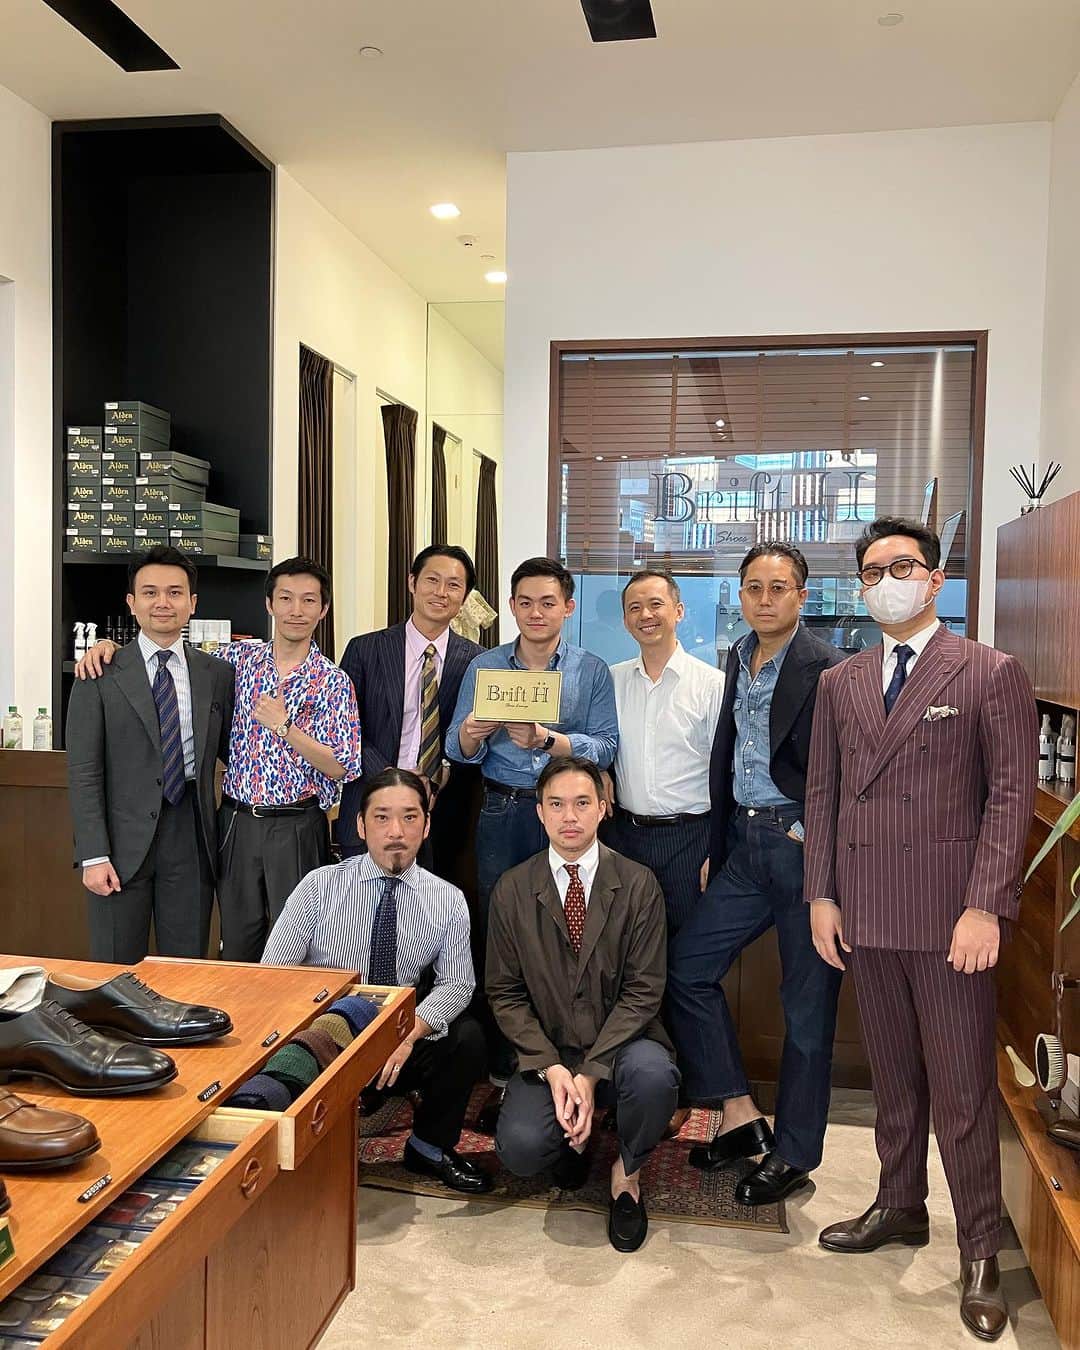 Yuya Hasegawaのインスタグラム：「Team @brift.h_thailand   Brift H is now open in Thailand. We will do our best to help leather shoe lovers in Thailand to make their feet shine! We look forward to working with you!  #タイの足元に革命を #世界の足元に革命を #brifththailand #brifth #shoeshine #thedecorumbkk」